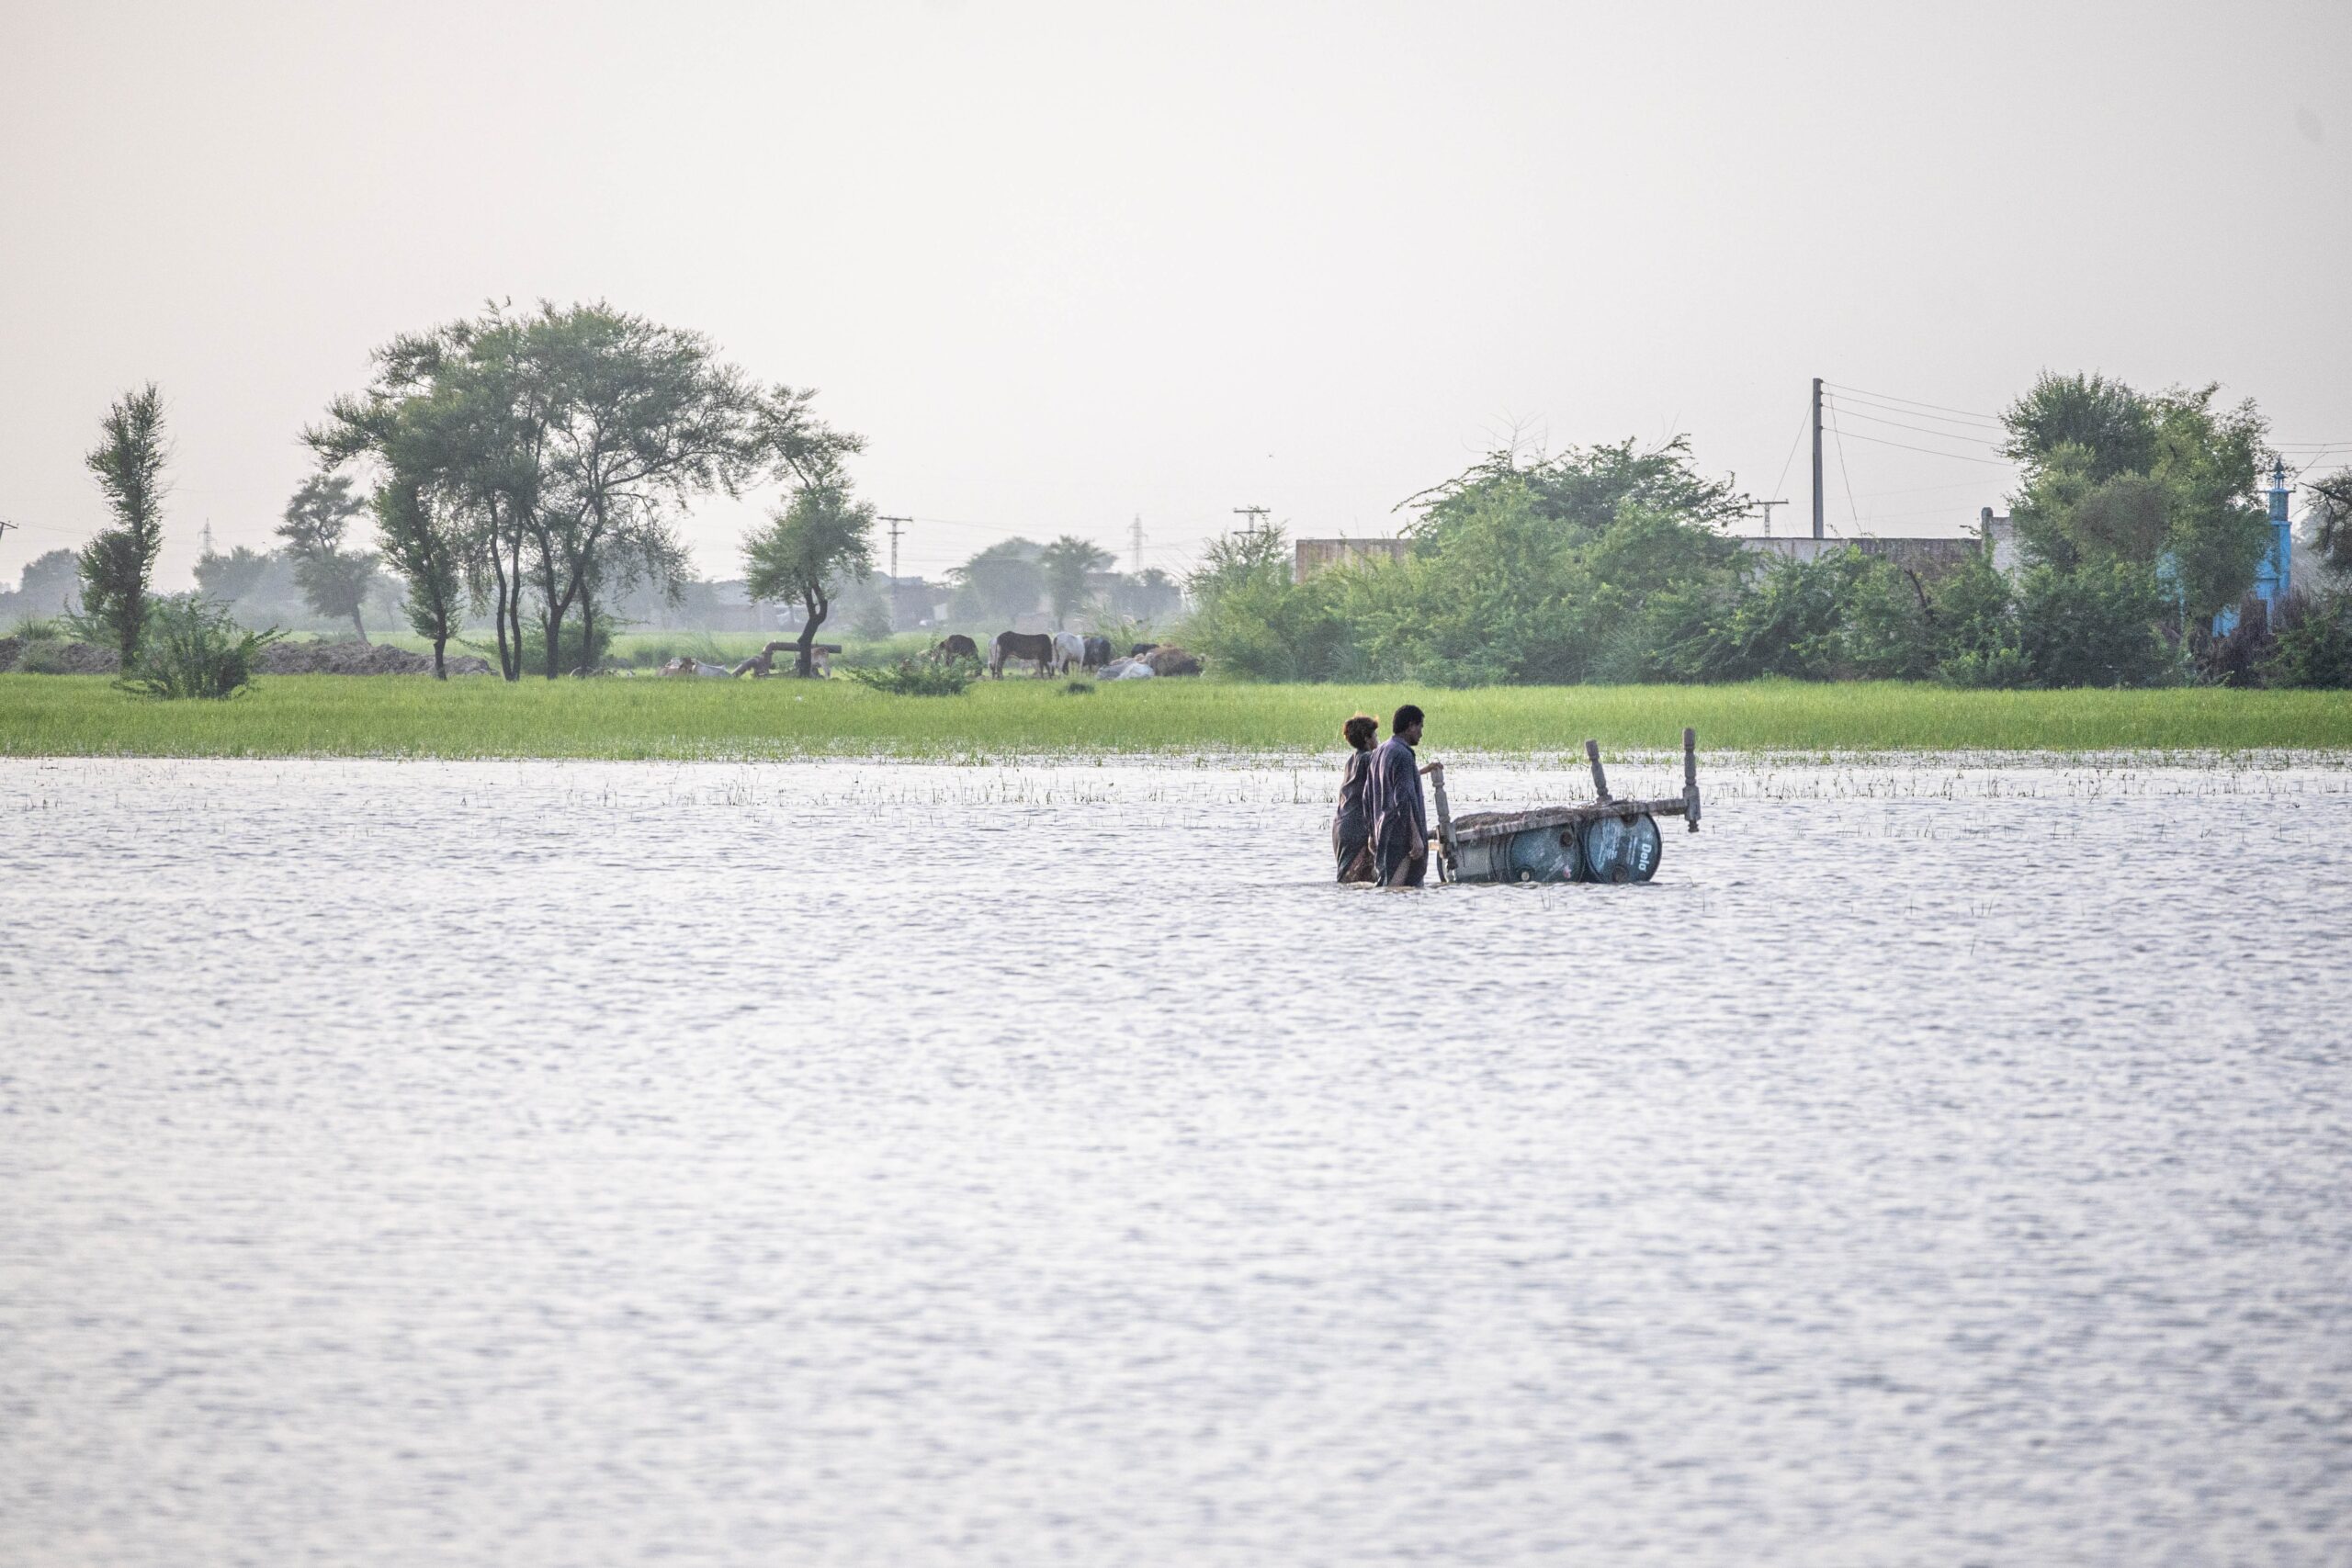 Photo of two people standing in flood waters, with a town in the background, Pakistan.